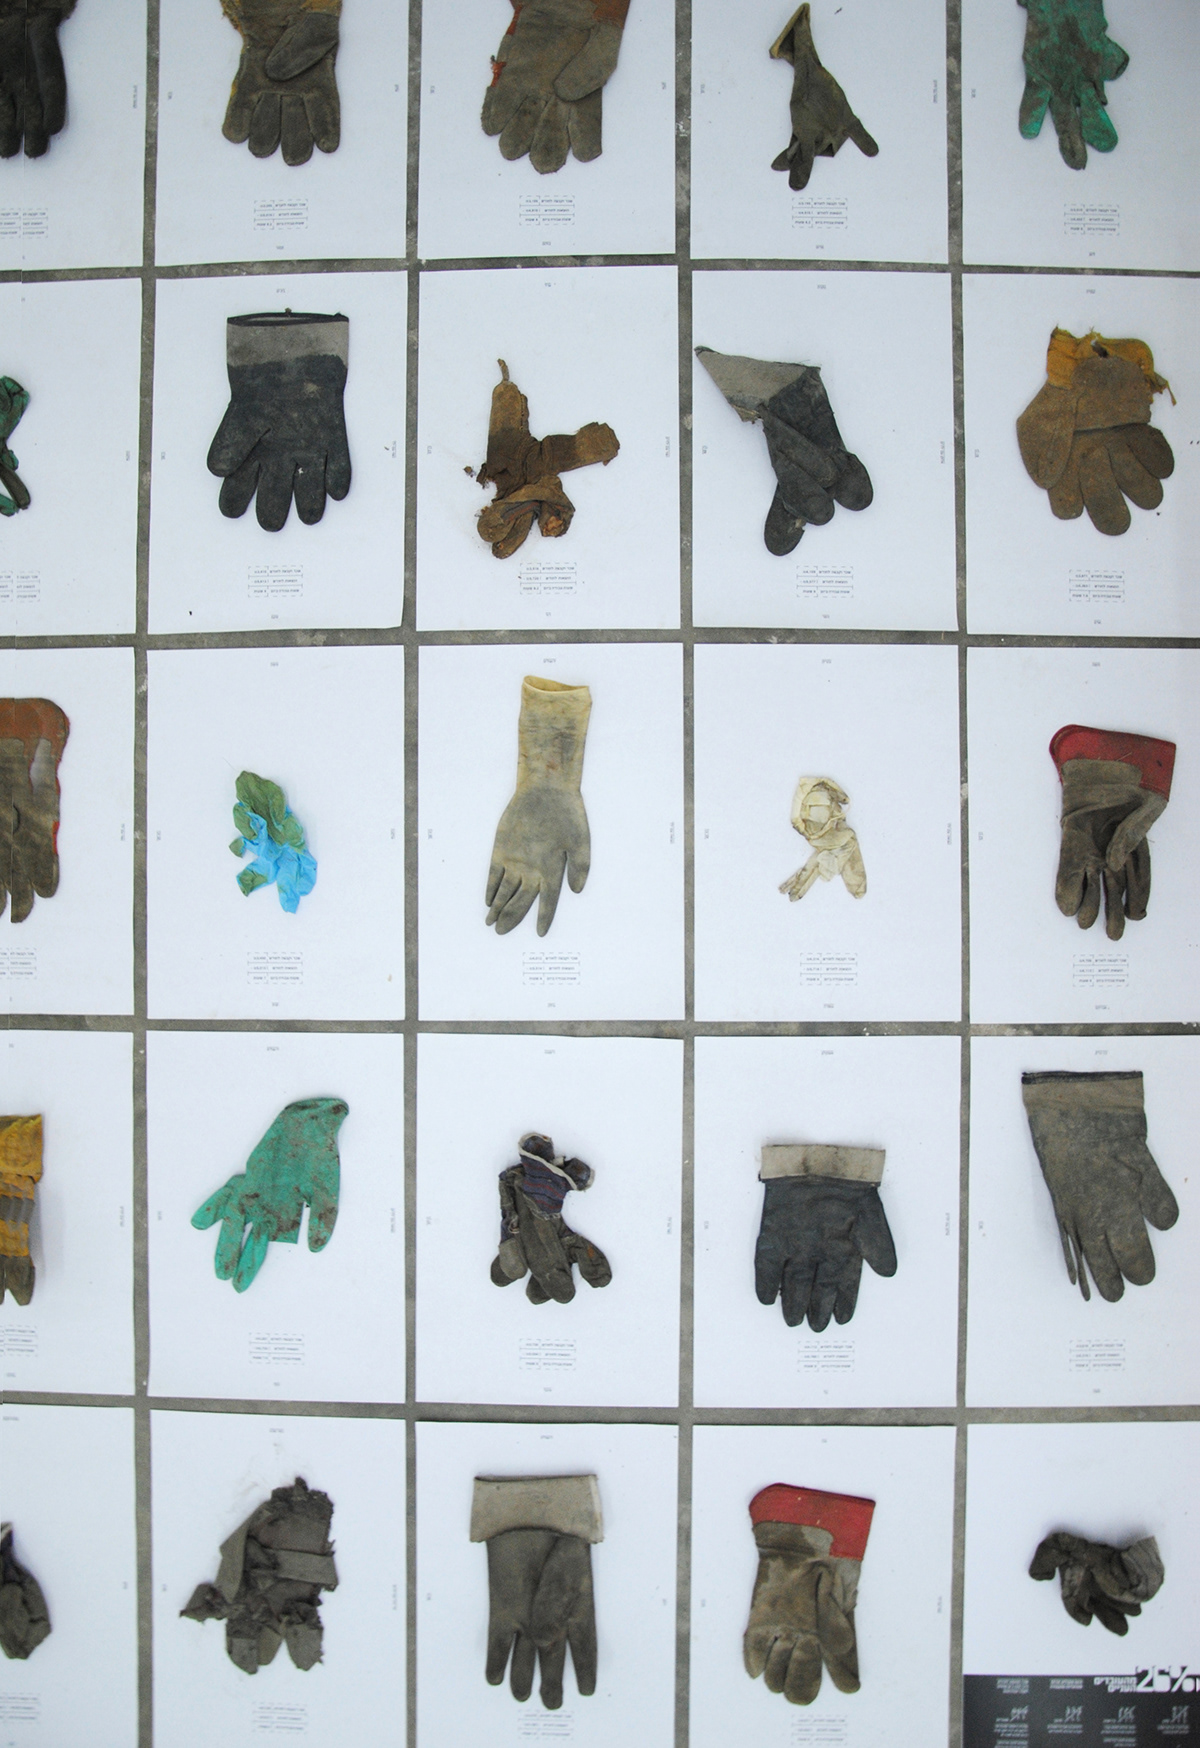 "Lechem-Avoda" (means work's outcome): The project is focusing on Israeli workers found Below the poverty line. The project displays 100 gloves where each one presents once percent. The gloves put in order by the working conditions and cost of living difficulties. At each group's side